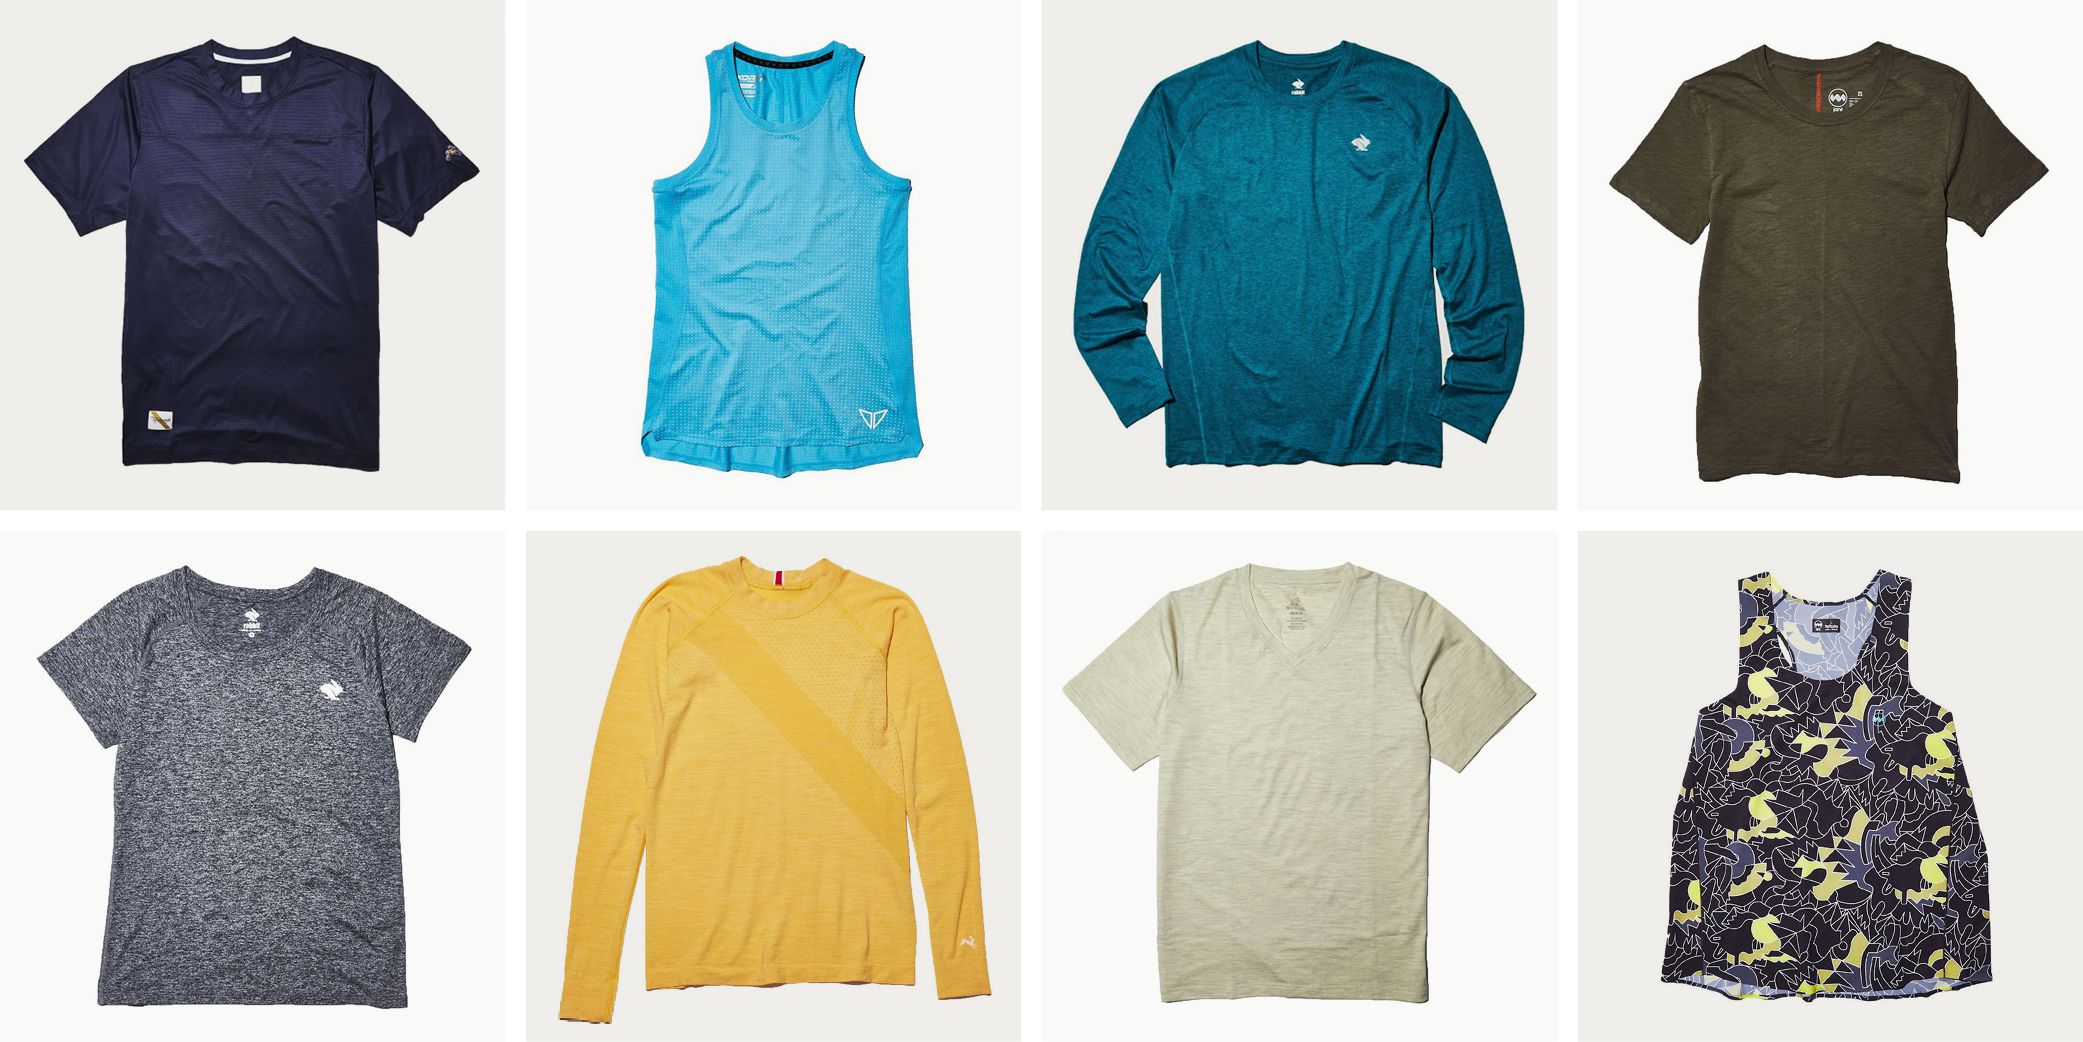 breathable athletic shirts